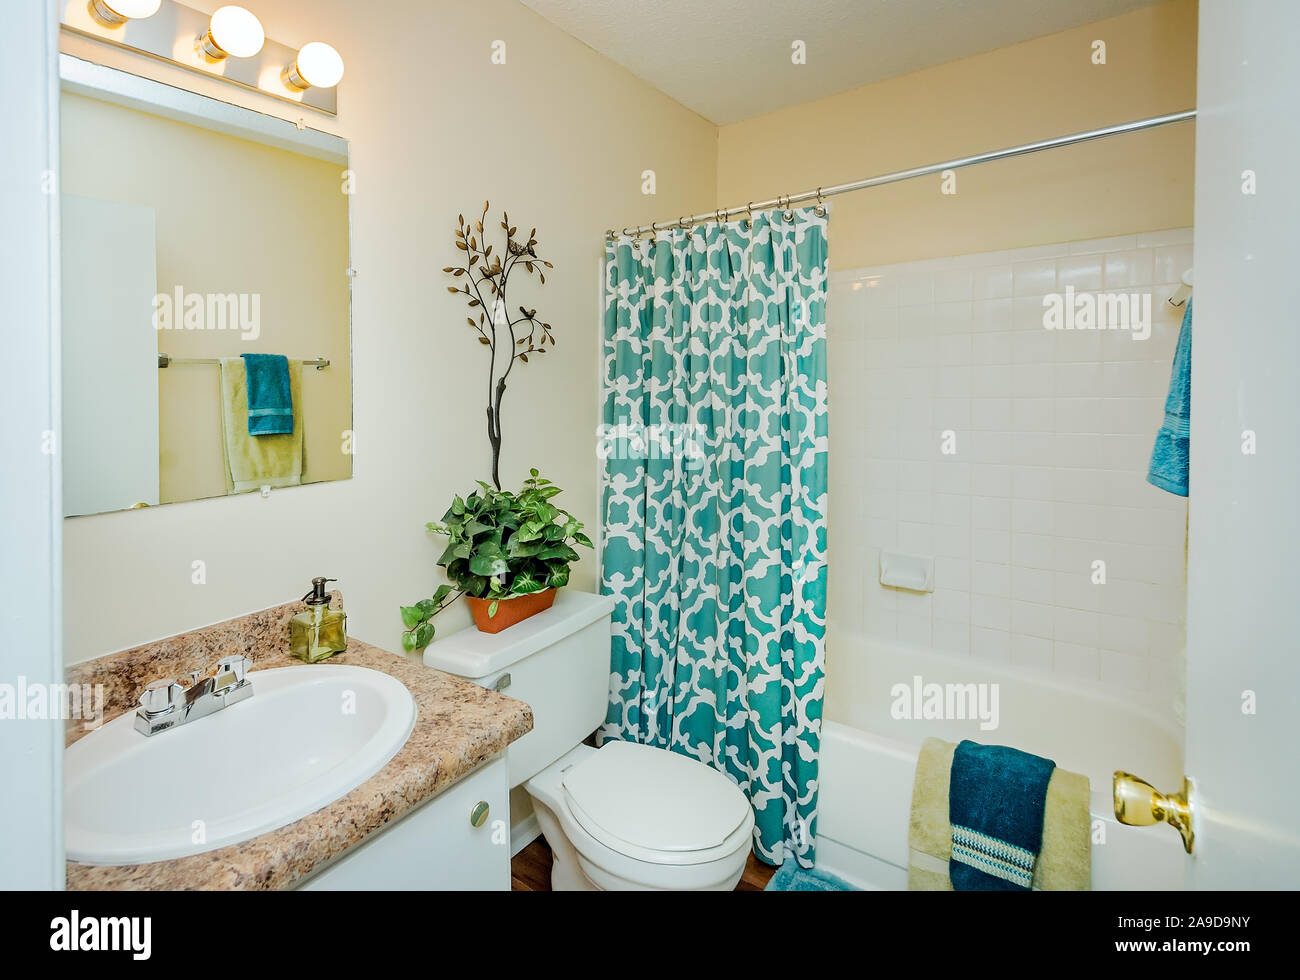 A bathroom at Autumn Woods Apartments, located on Foreman Road in Mobile, Alabama. The apartment complex is owned and operated by Sealy Management. Stock Photo